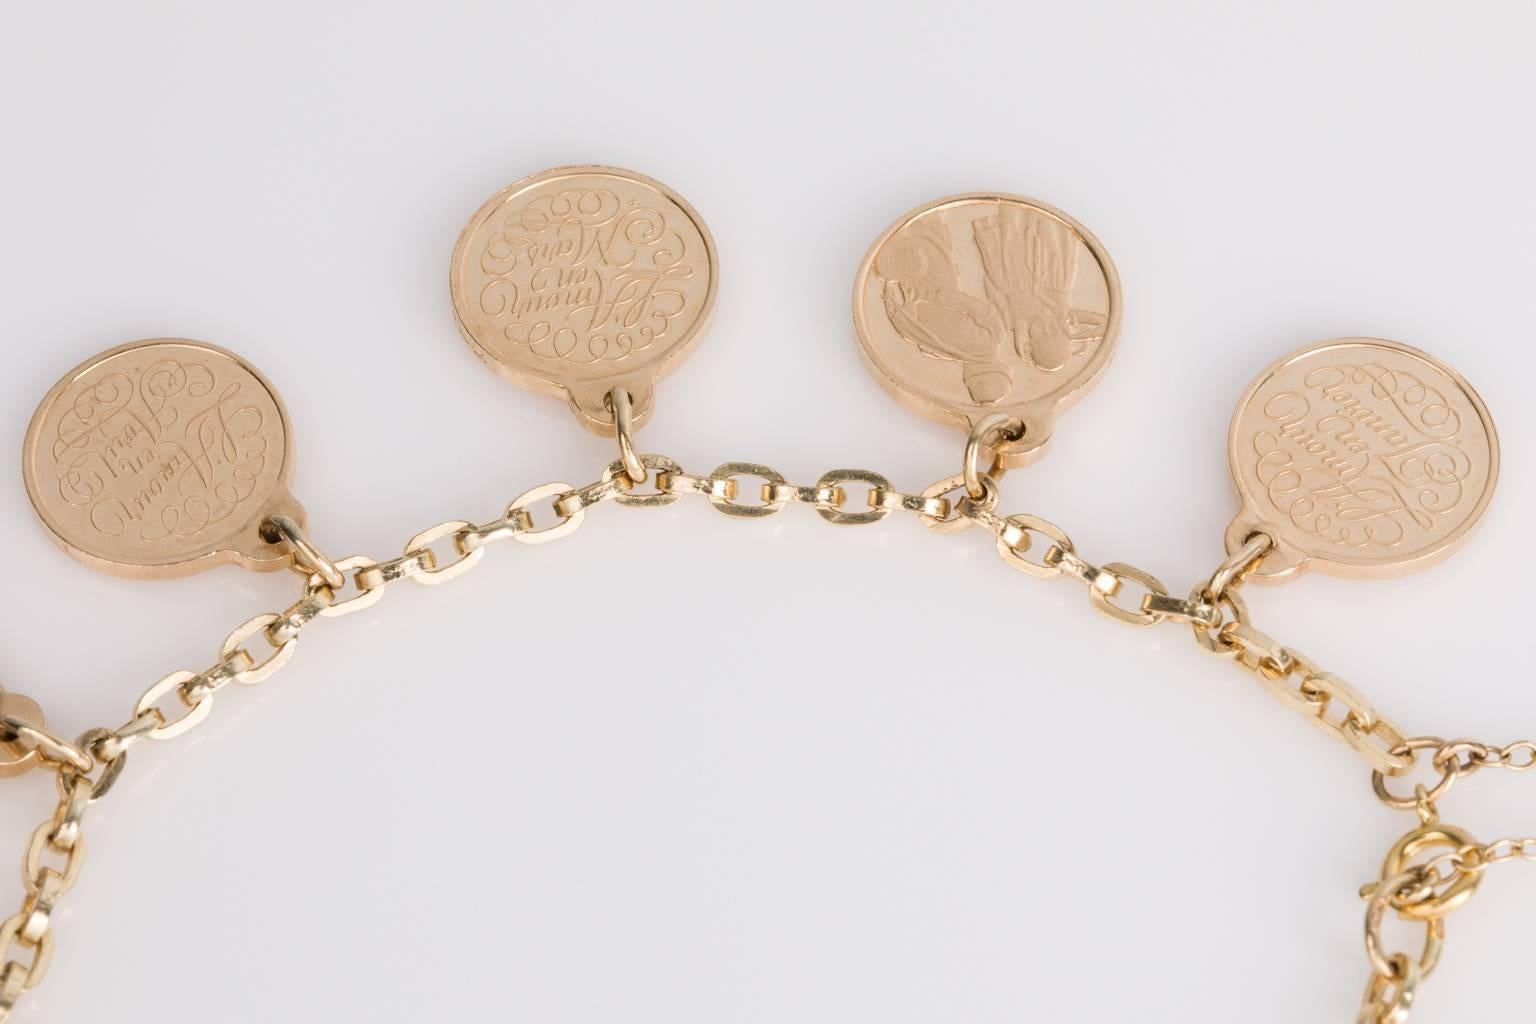 How beautiful is this idea? Each charm represents a month, given to the love of your life to show your undying love for them, so romantic. 
With a 14k yellow gold belcher link chain bracelet adorned with 12 "Love" Charms written in French.